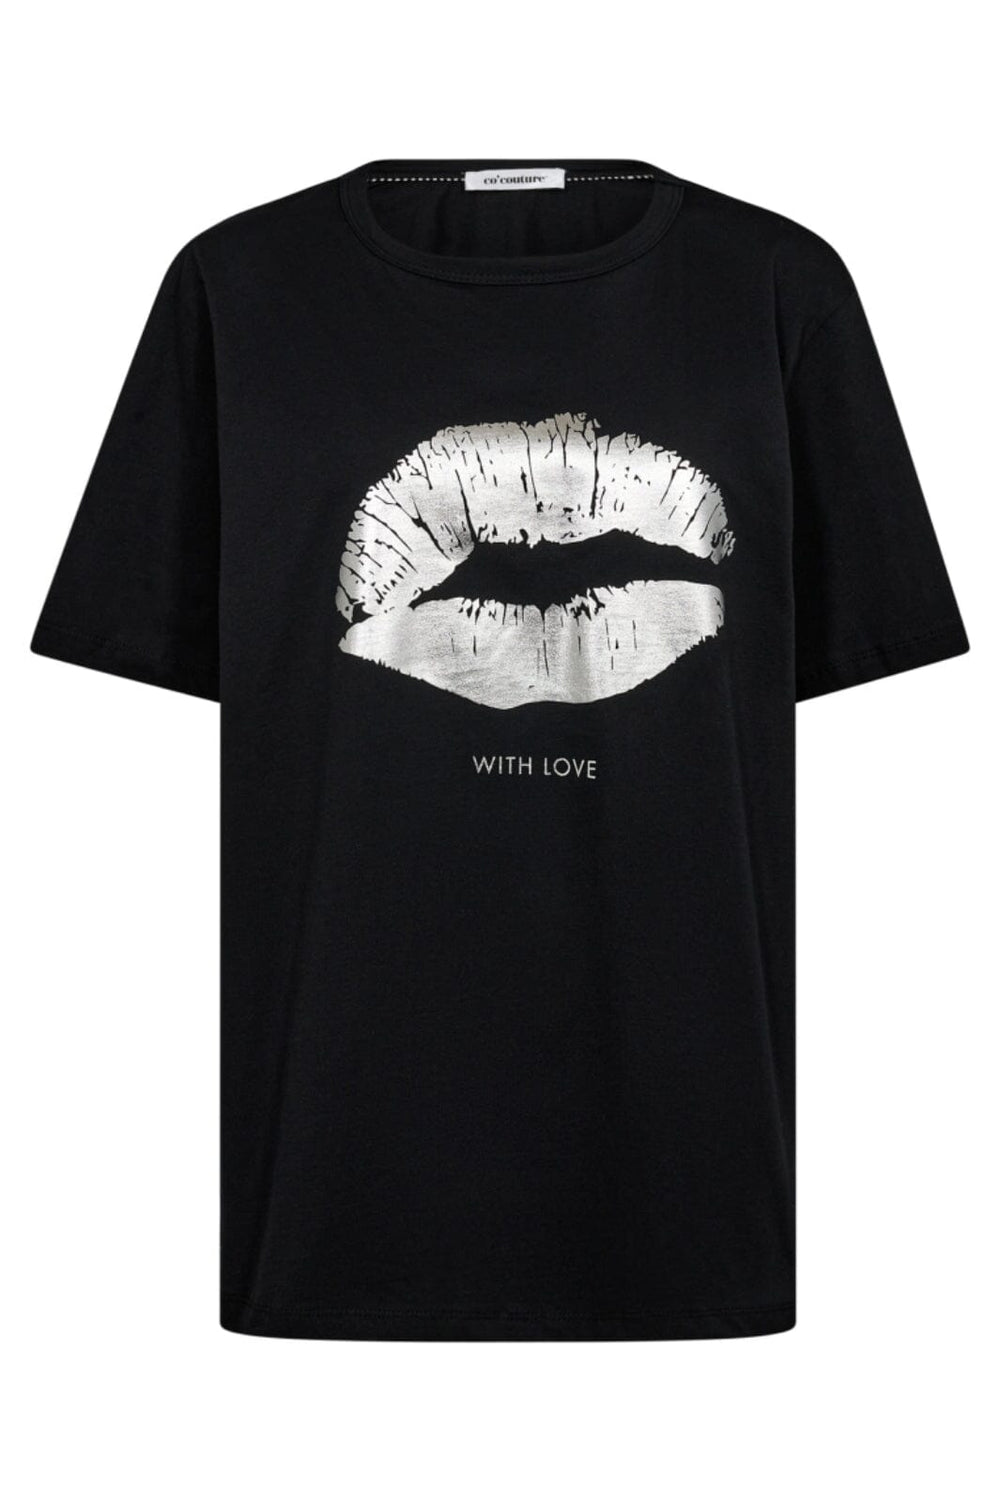 Co´couture - The Kisscc Oversize Tee 33099 - 96 Black T-shirts 